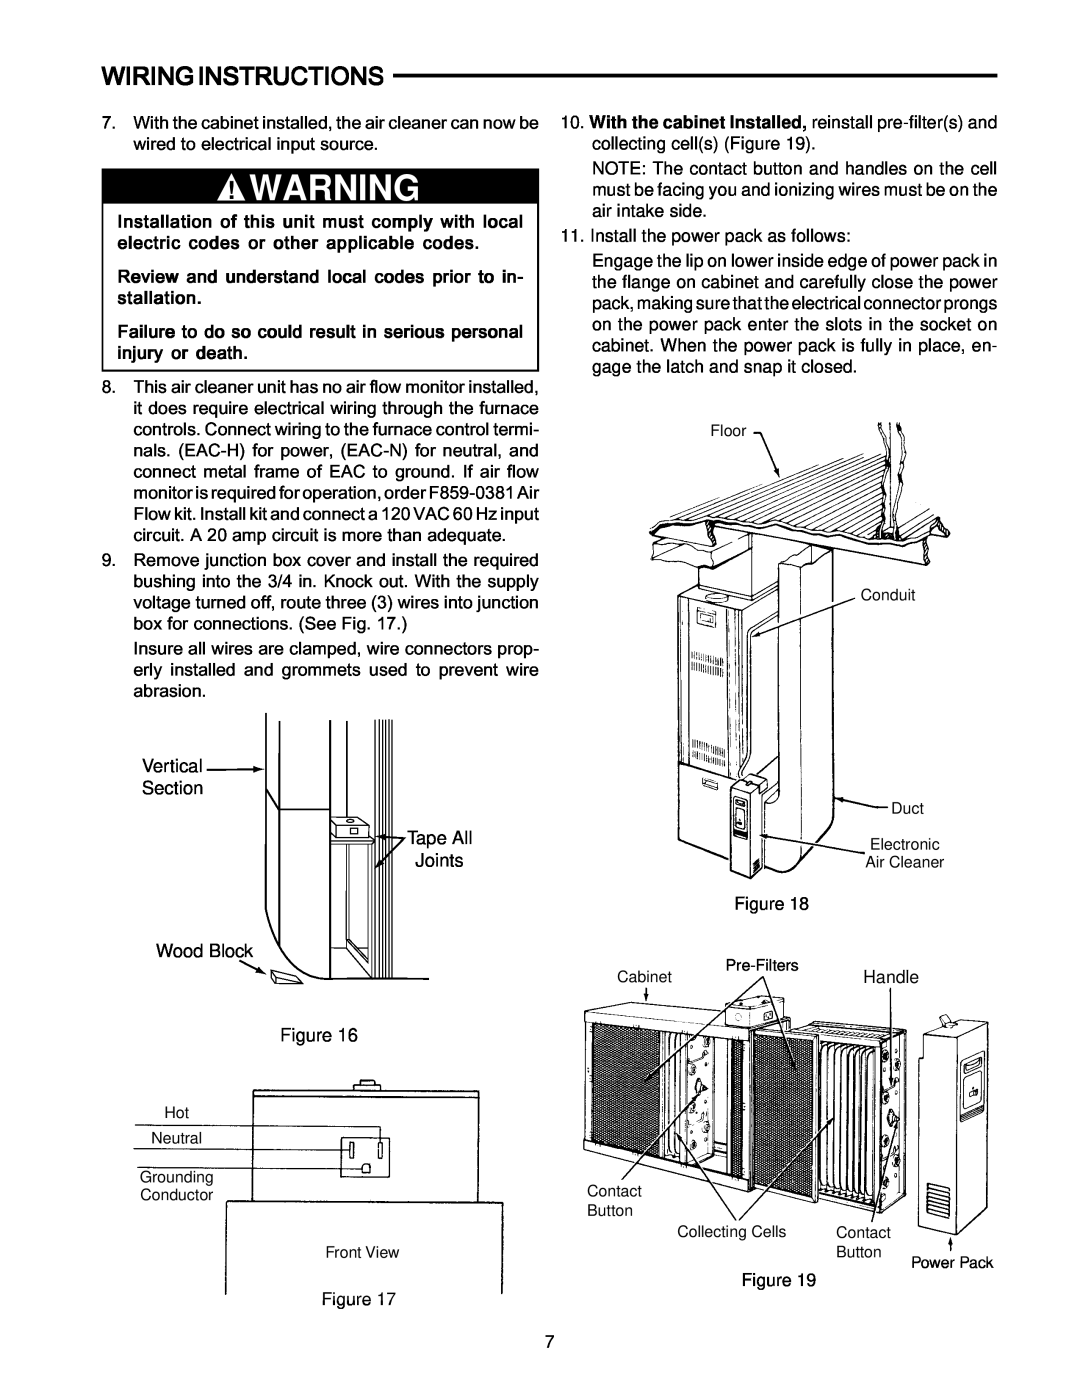 White Rodgers SST1400, SST2000, SST1600 owner manual Wiringinstructions, Vertical Section, Joints, Wood Block 